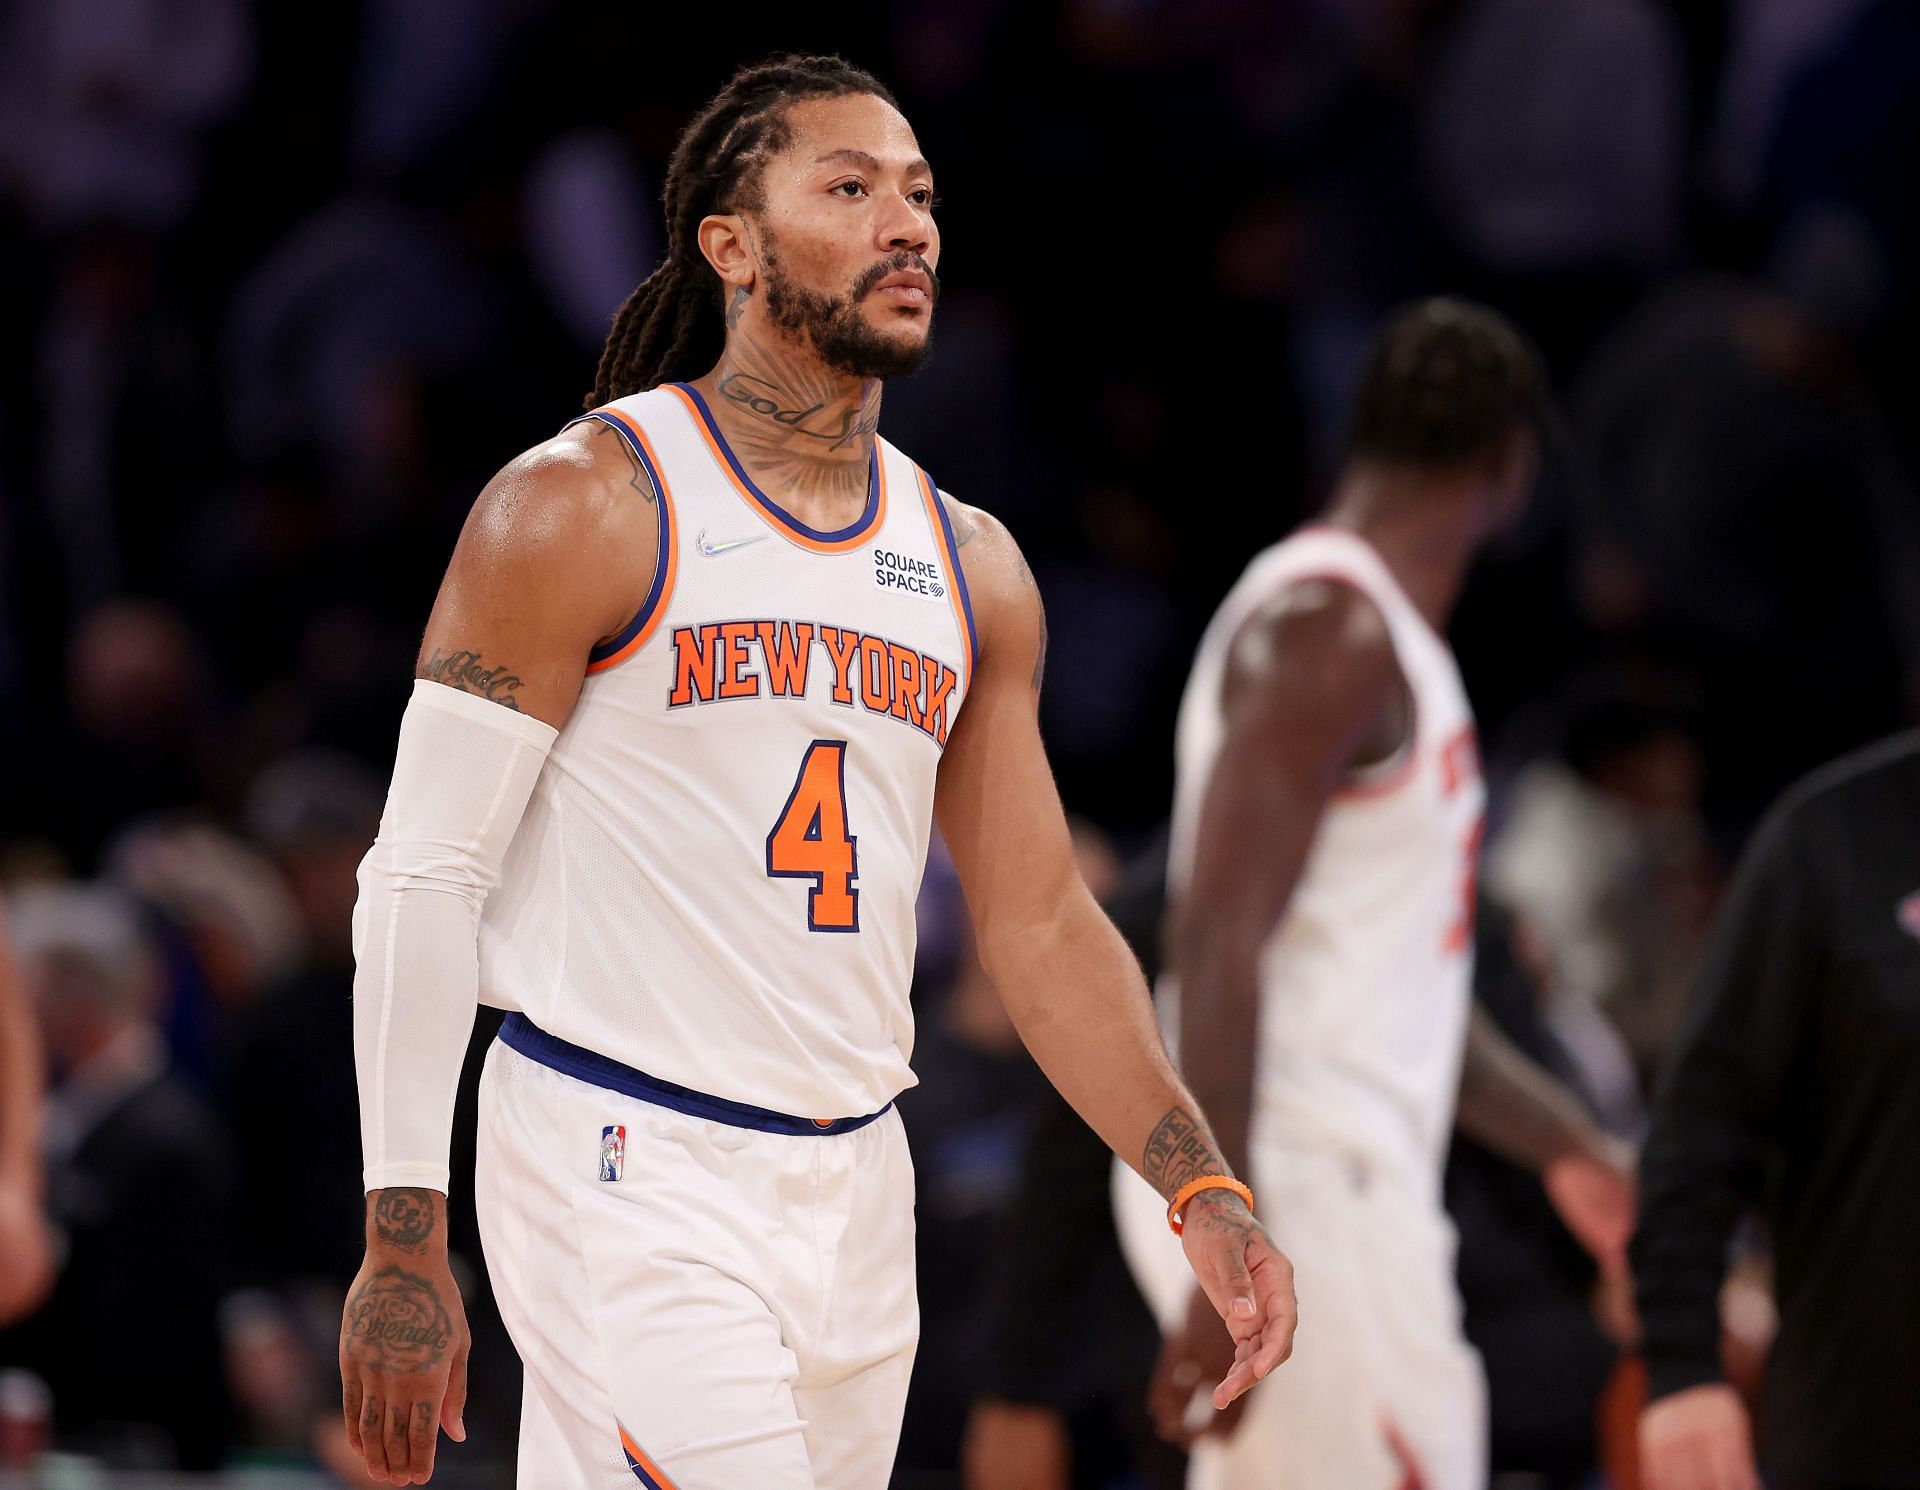 Derrick Rose #4 of the New York Knicks walks off the court after the loss to the Orlando Magic at Madison Square Garden on November 17, 2021 in New York City. The Orlando Magic defeated the New York Knicks 104-98.